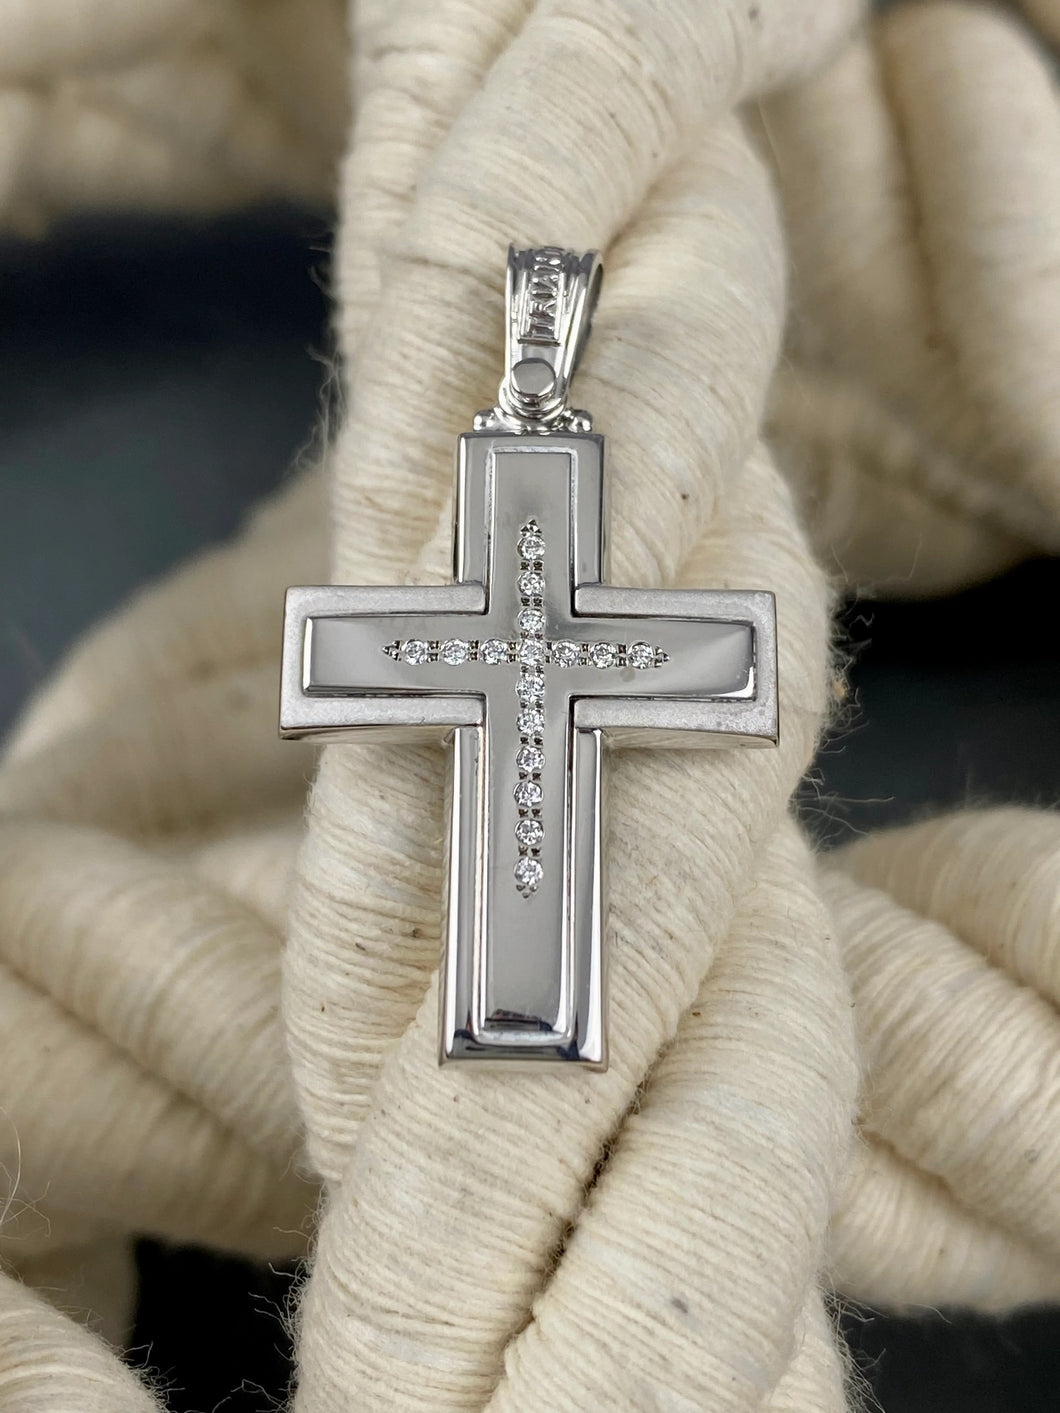 Triantos 14k White Gold Cross Polished and Brushed with Precious Stones 3.84g 222124